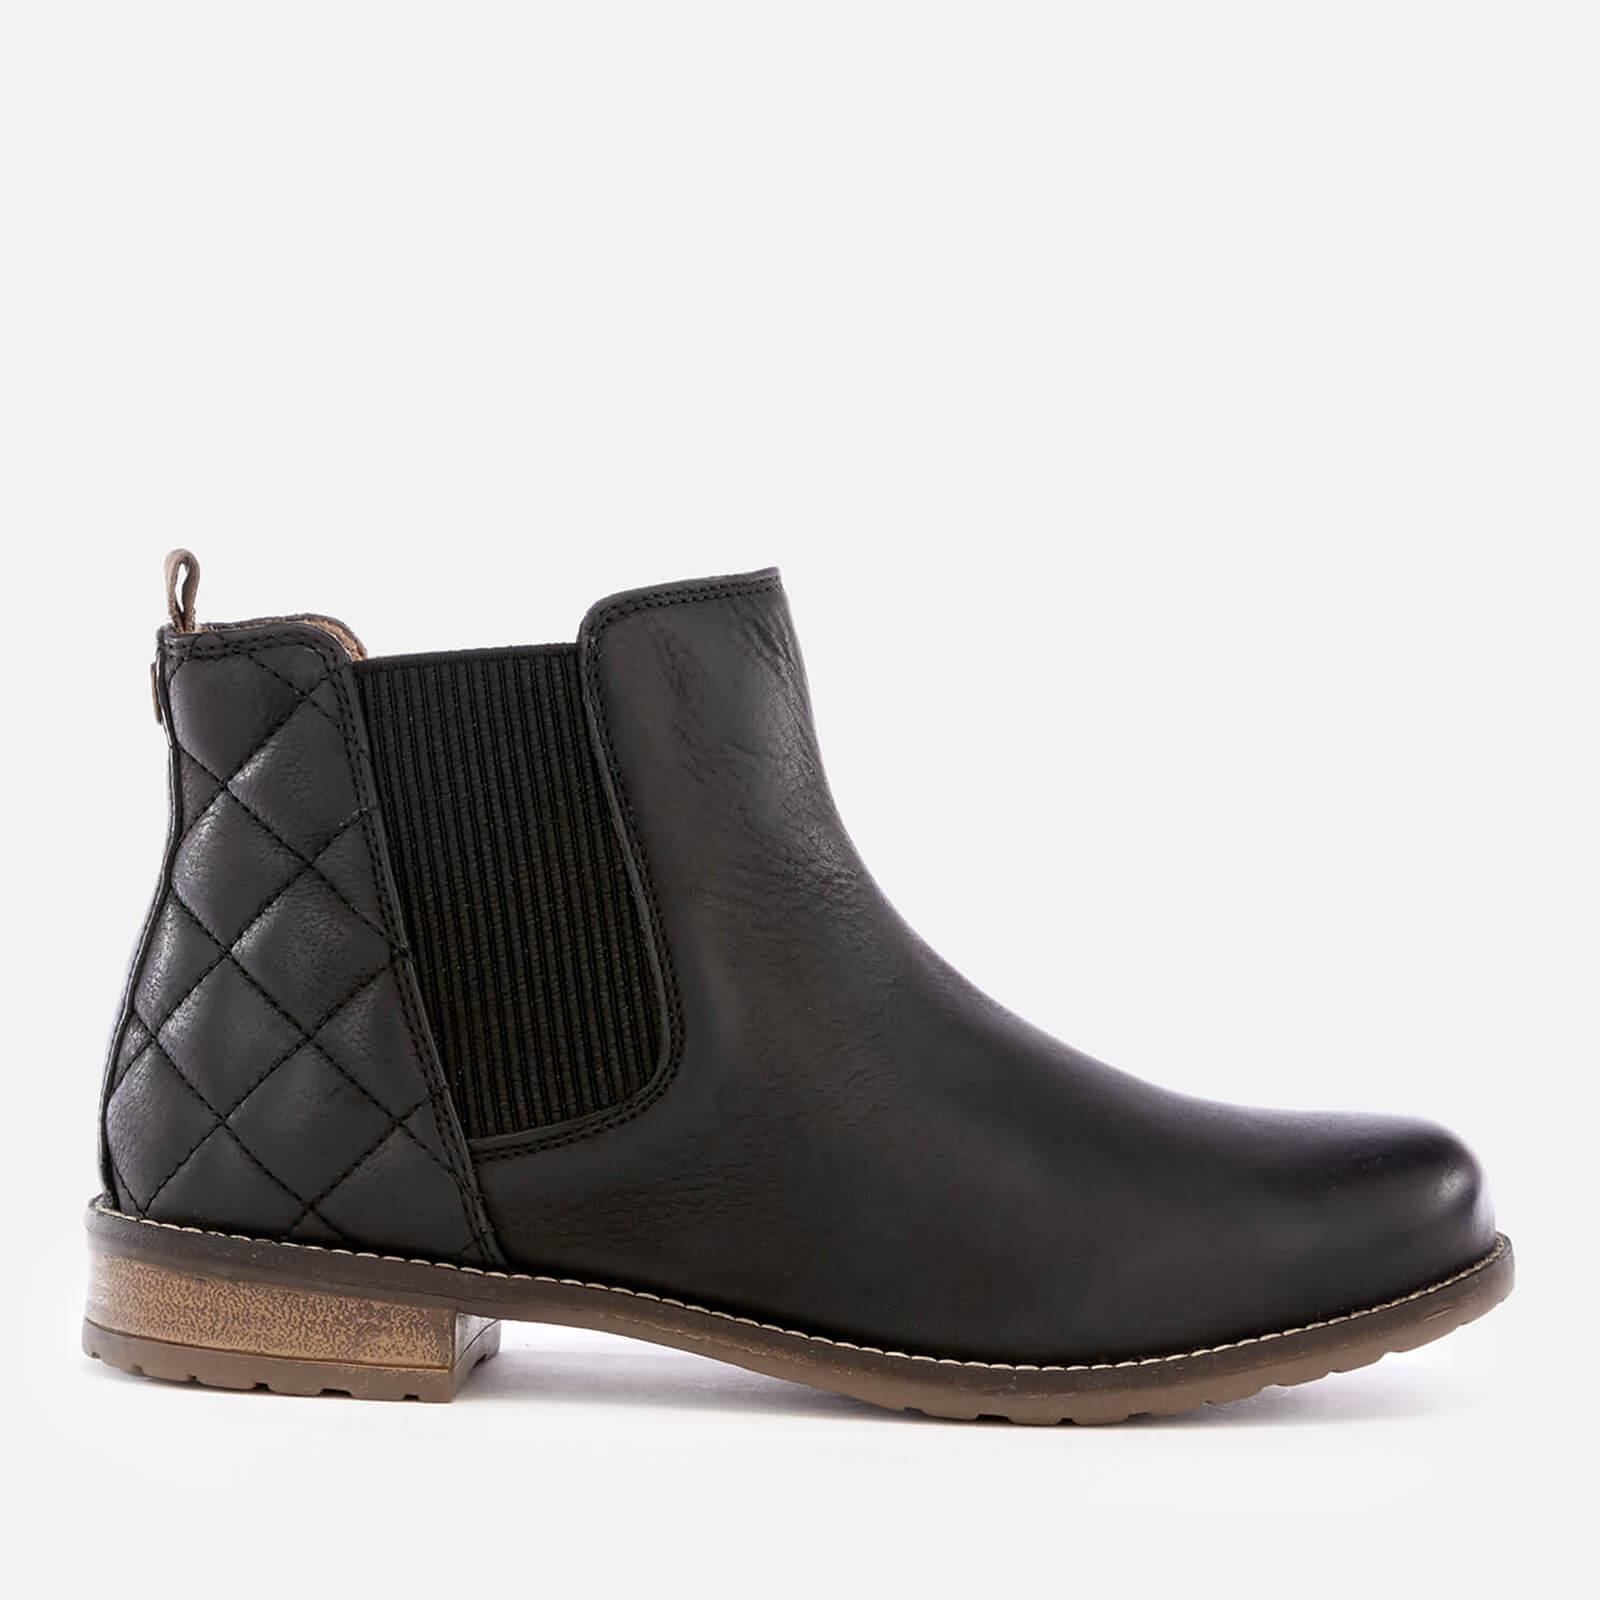 Barbour Women’s Abigail Leather Quilted Chelsea Boots - Black